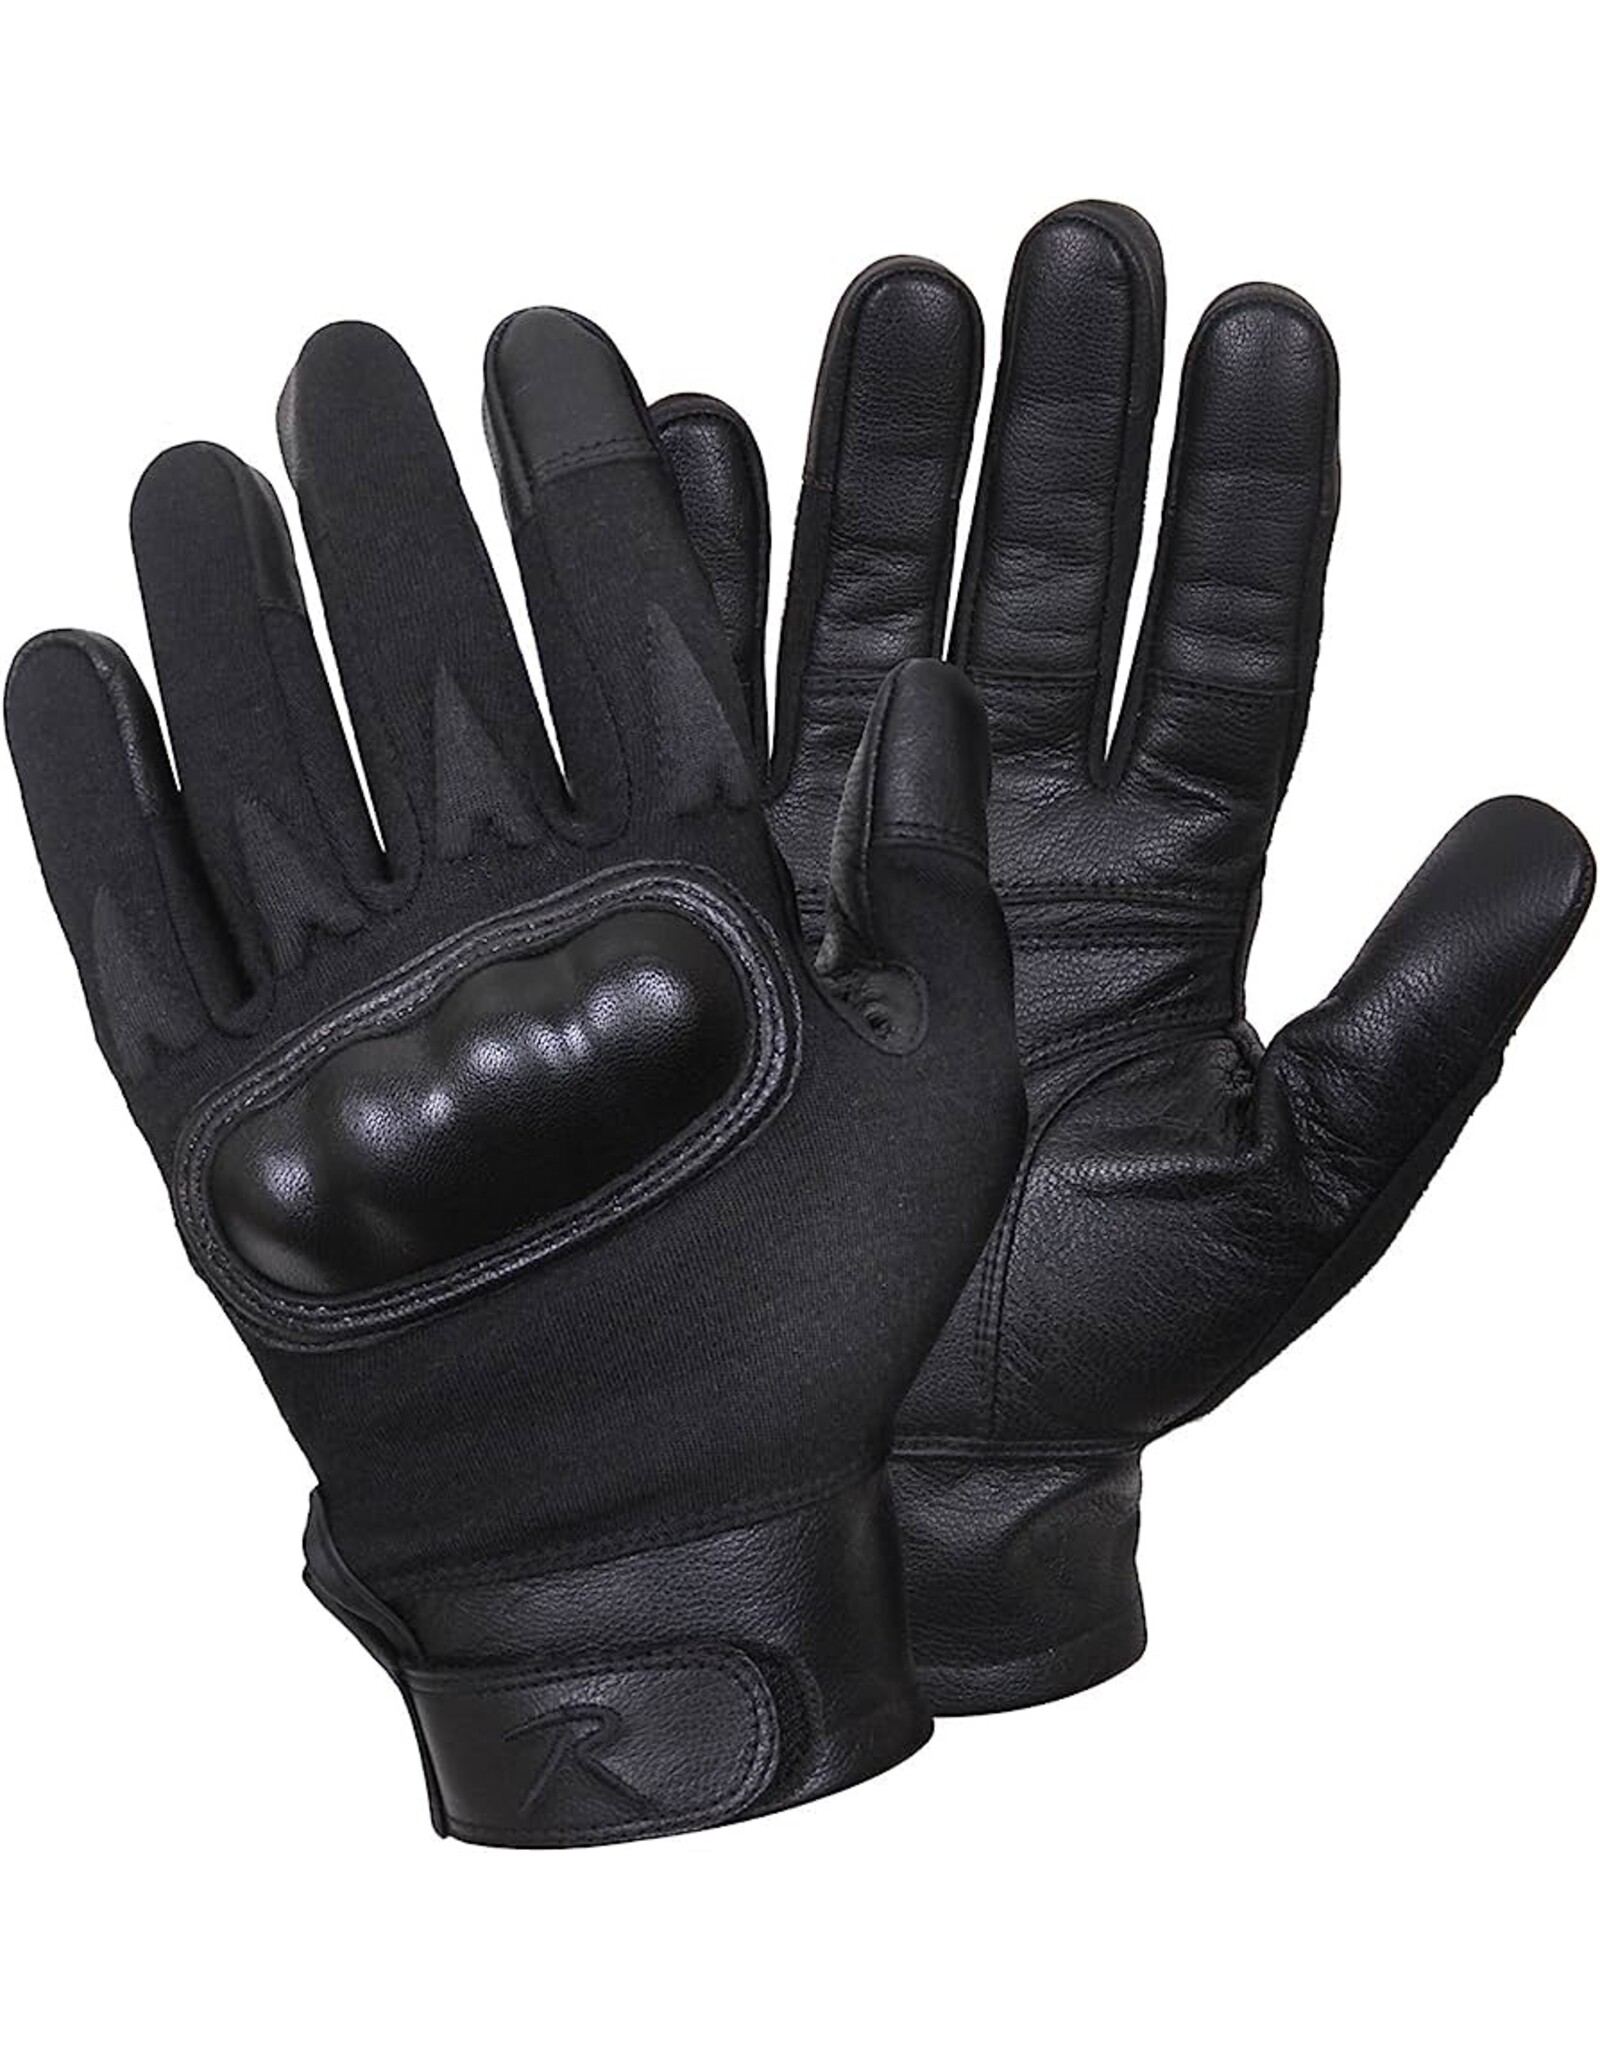 ROTHCO HARD KNUCKLE CUT/FIRE RESISTANT GLOVES